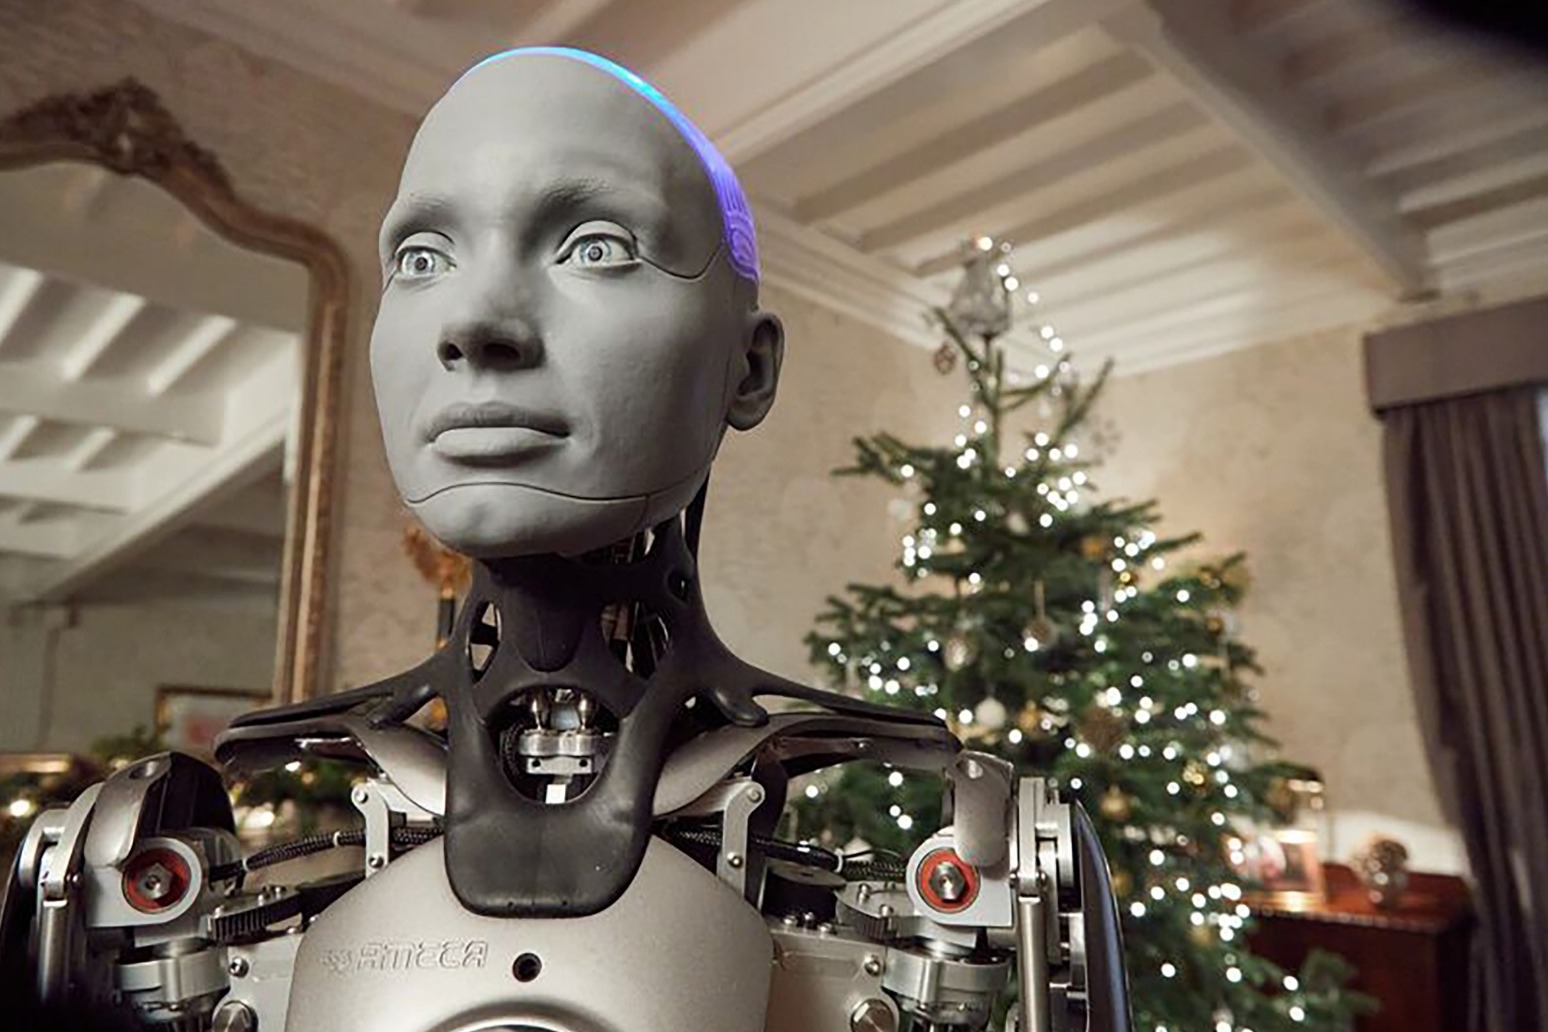 Channel 4’s Christmas message to be AI-generated and delivered by a robot 